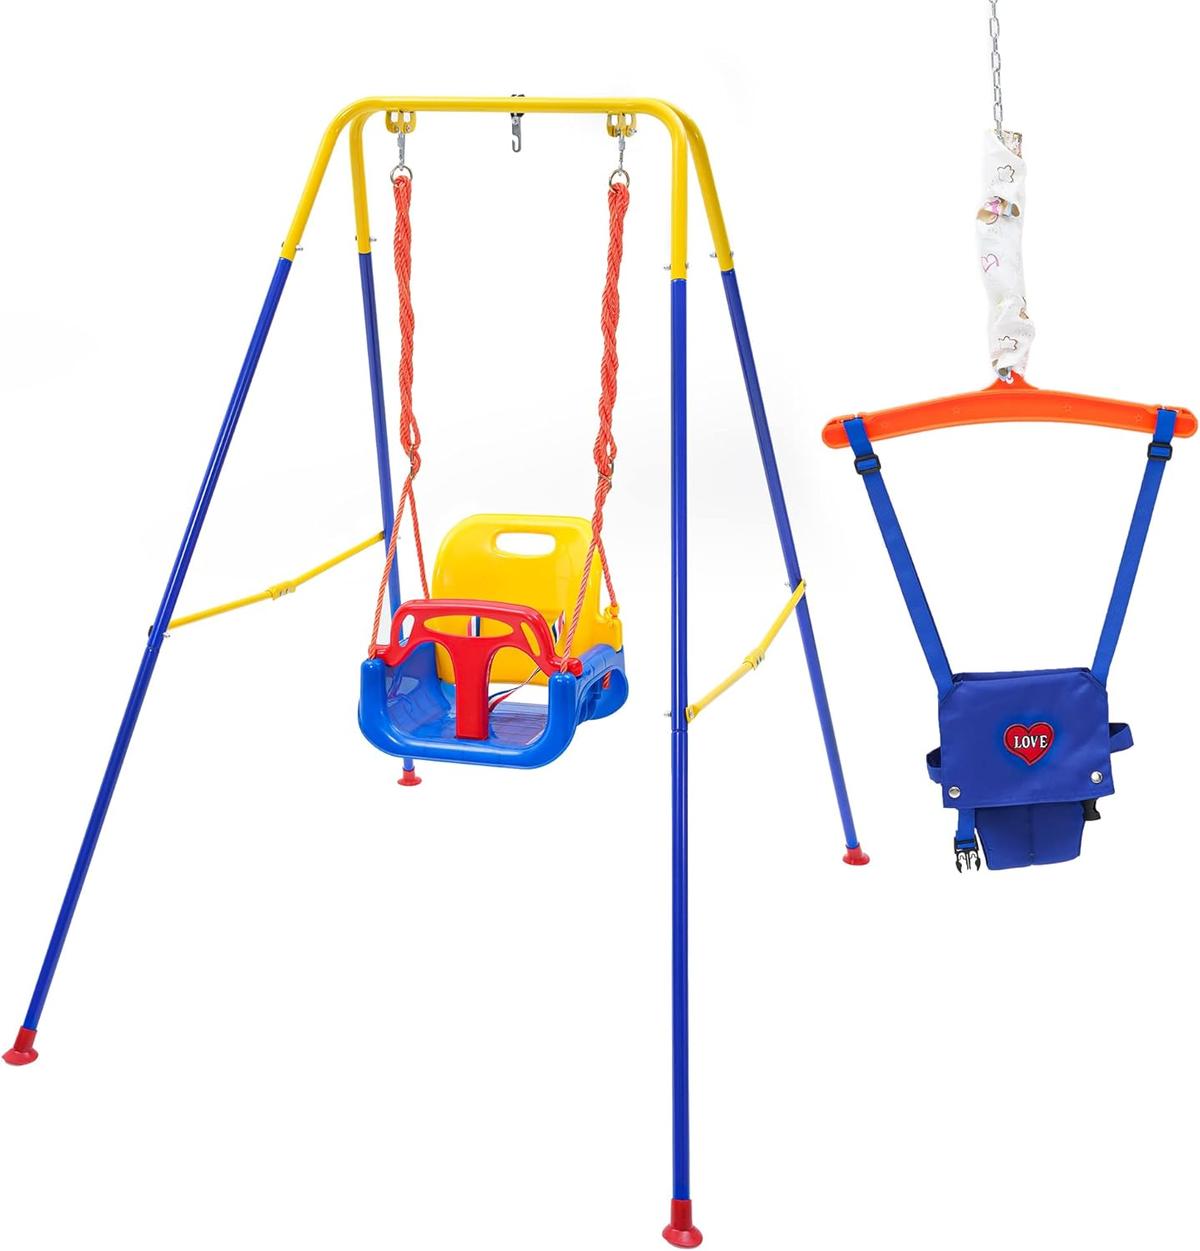 3-in-1 Swing Set Baby Jumper /Bouncer for Toddler, Baby Swing.Retail $140.00